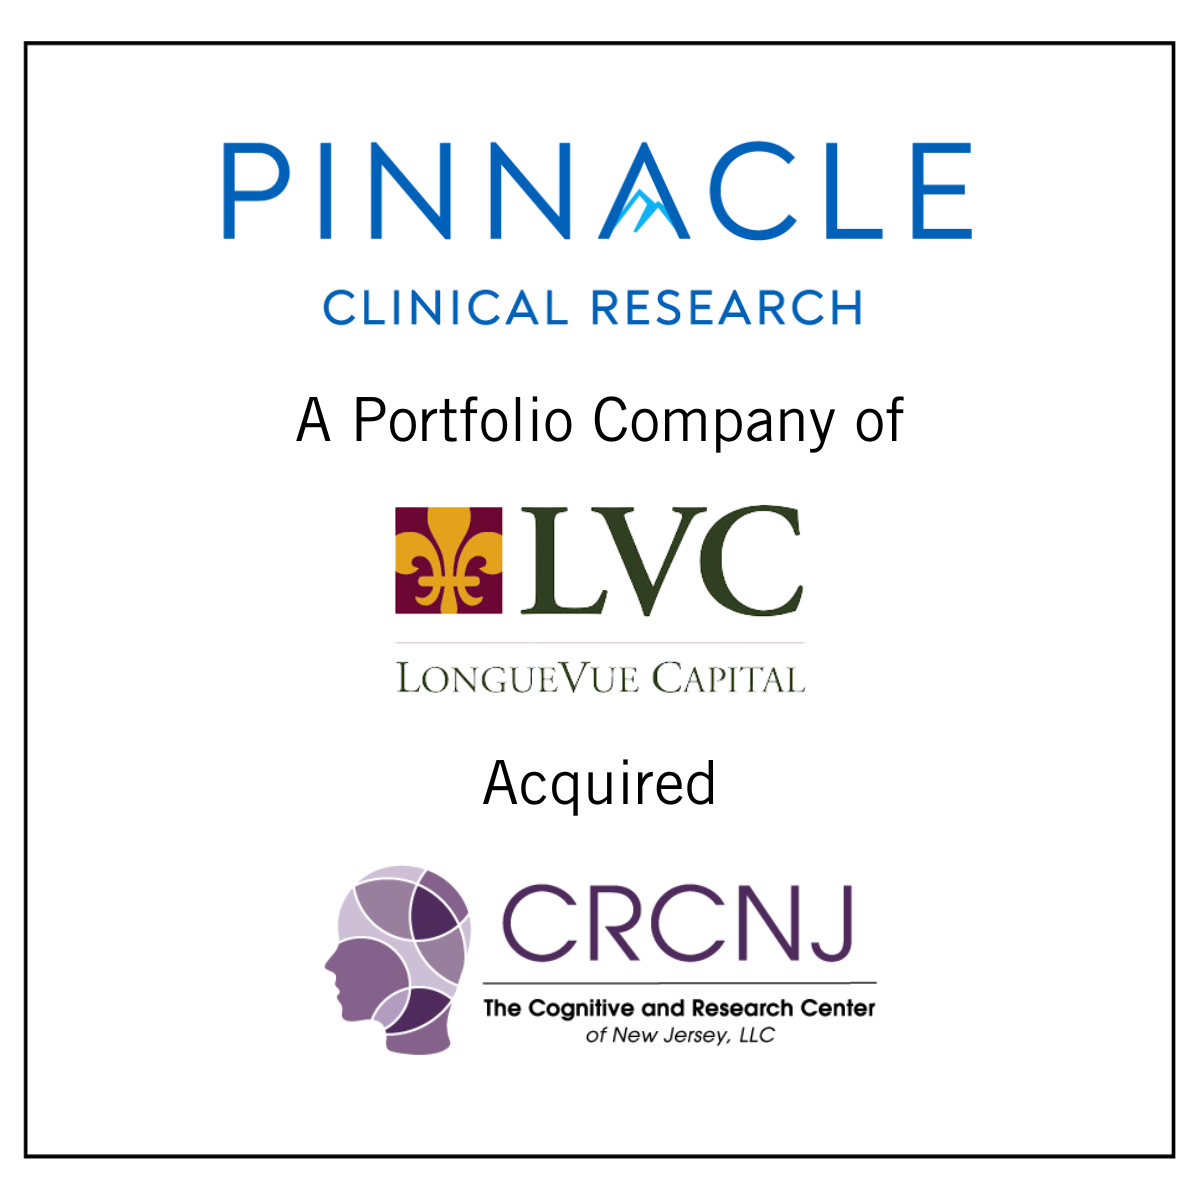 Pinnacle Clinical Research, a Portfolio Company of LongueVue Capital, Acquired The Cognitive and Research Center of New Jersey to Expand Clinical Trial Site Network to Expand its CNS Trial Execution Capabilities